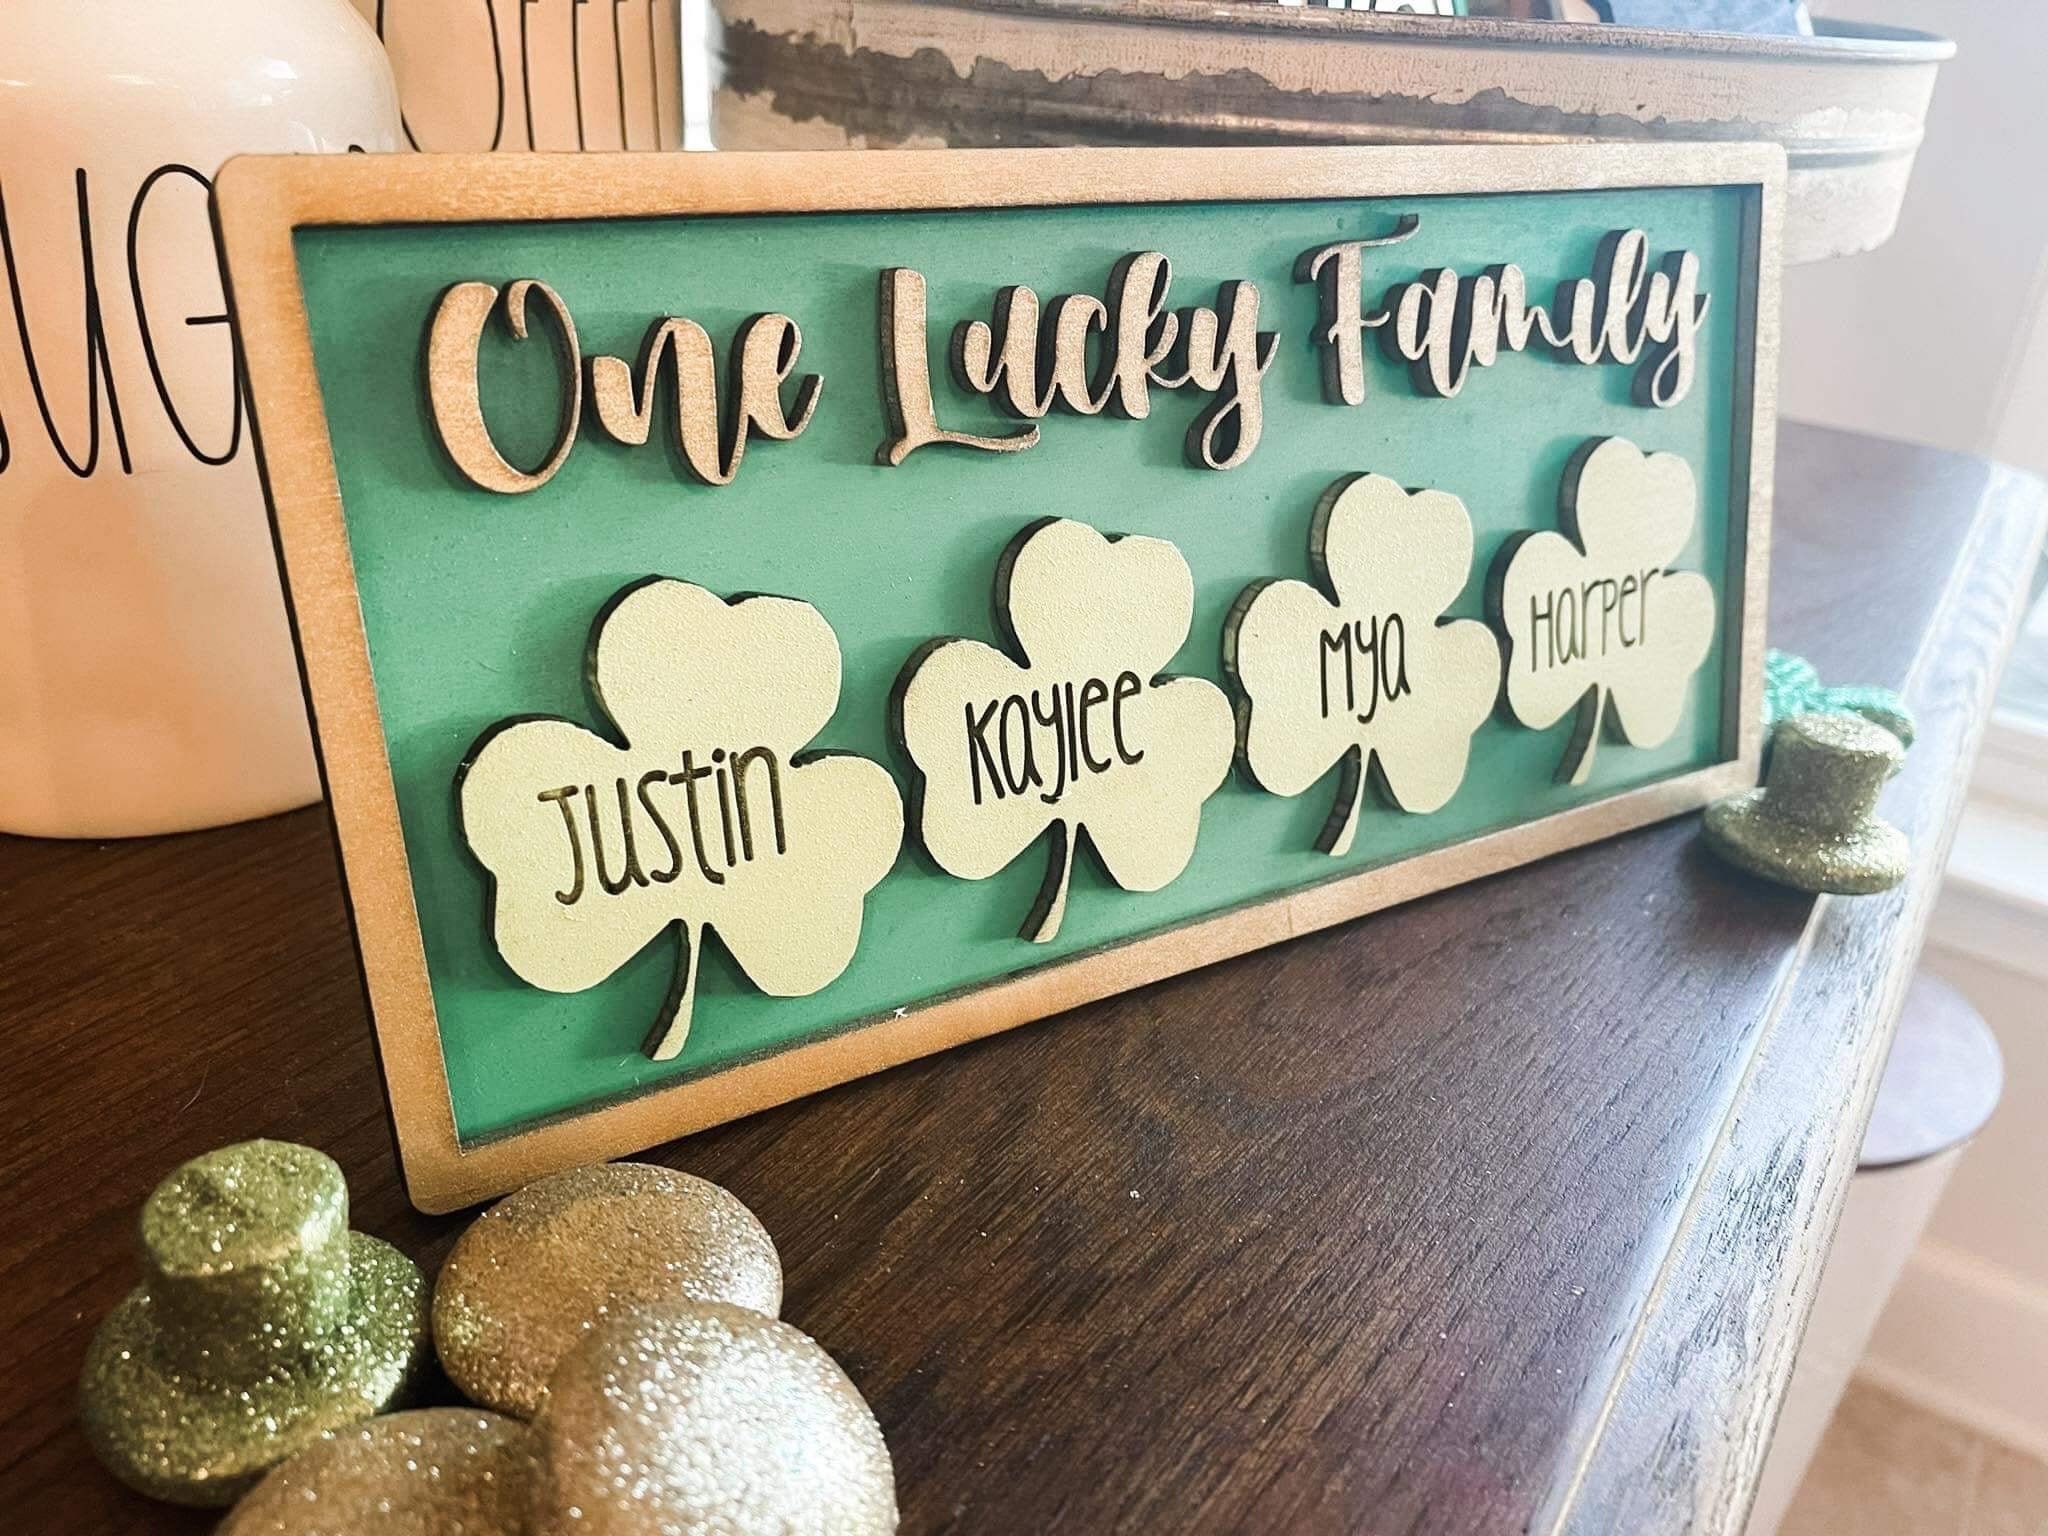 Luck of the Irish, St Patrick's Day Decor, Irish Decor, Living Room Sign,  Custom Farmhouse Sign, Wood Sign, Gift for the Home, Wedding Gift 